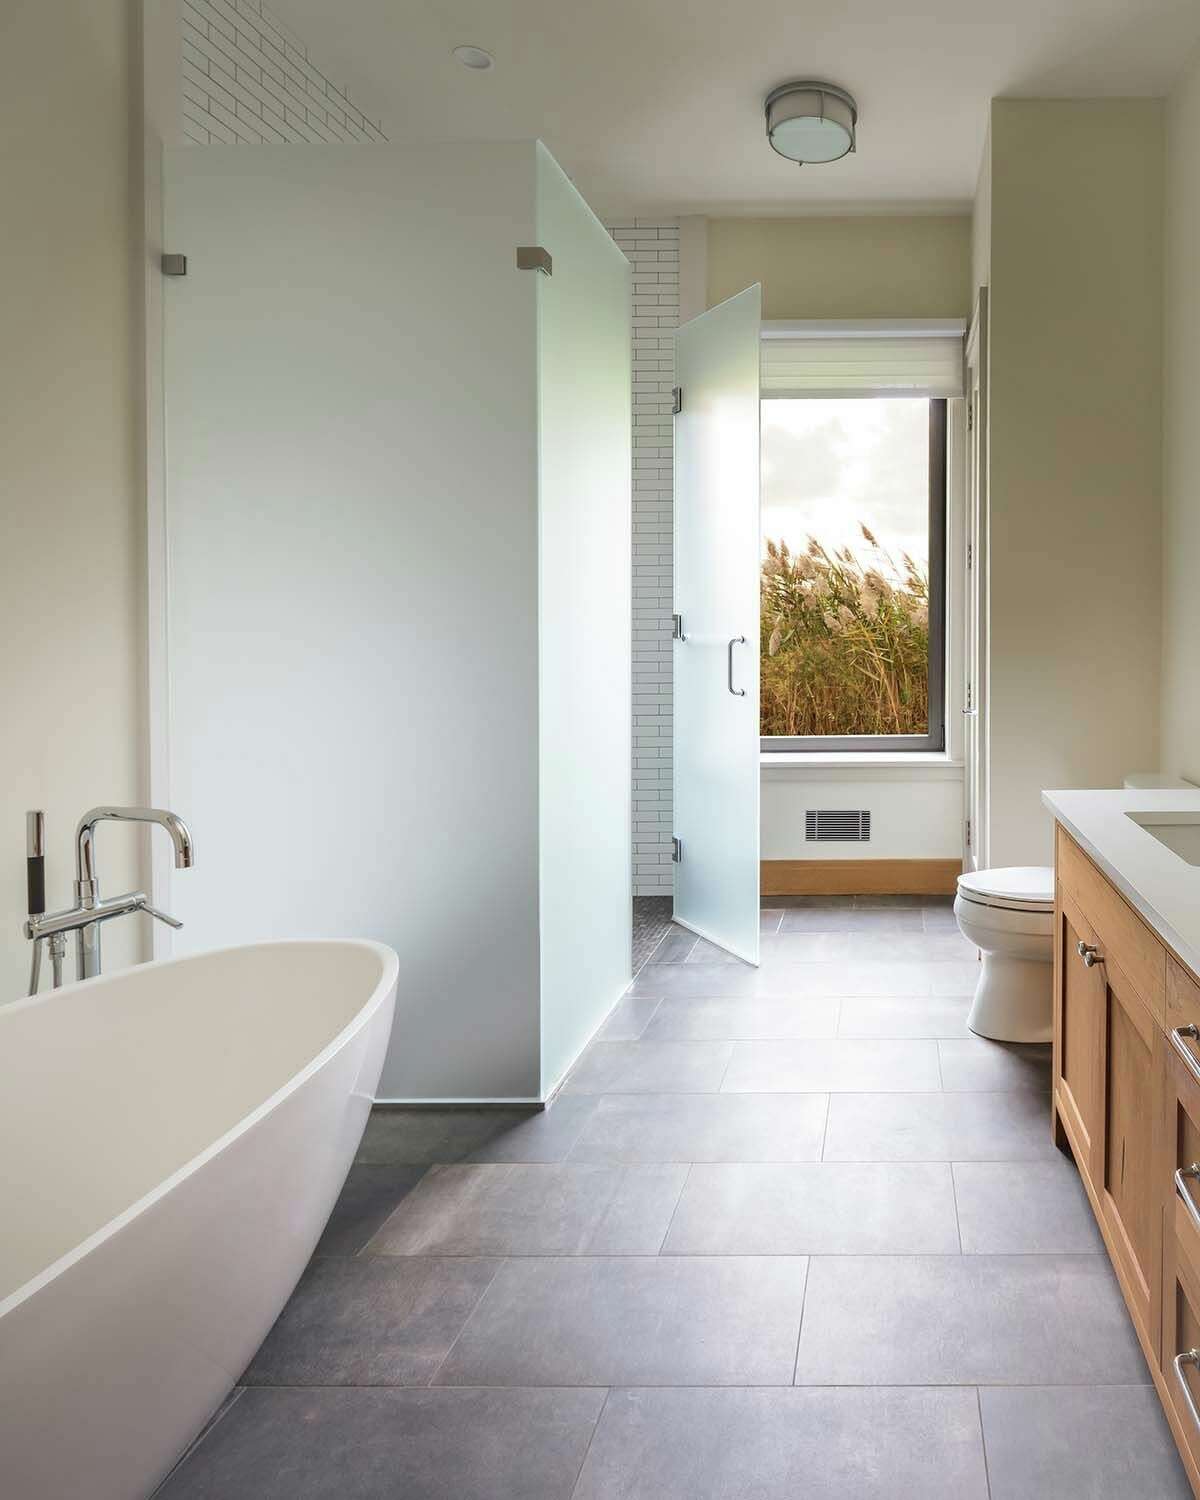 The neutral-toned bathroom, looking out over wind-swept tall reeds, includes a Barcelona soaking tub by Victoria & Albert.